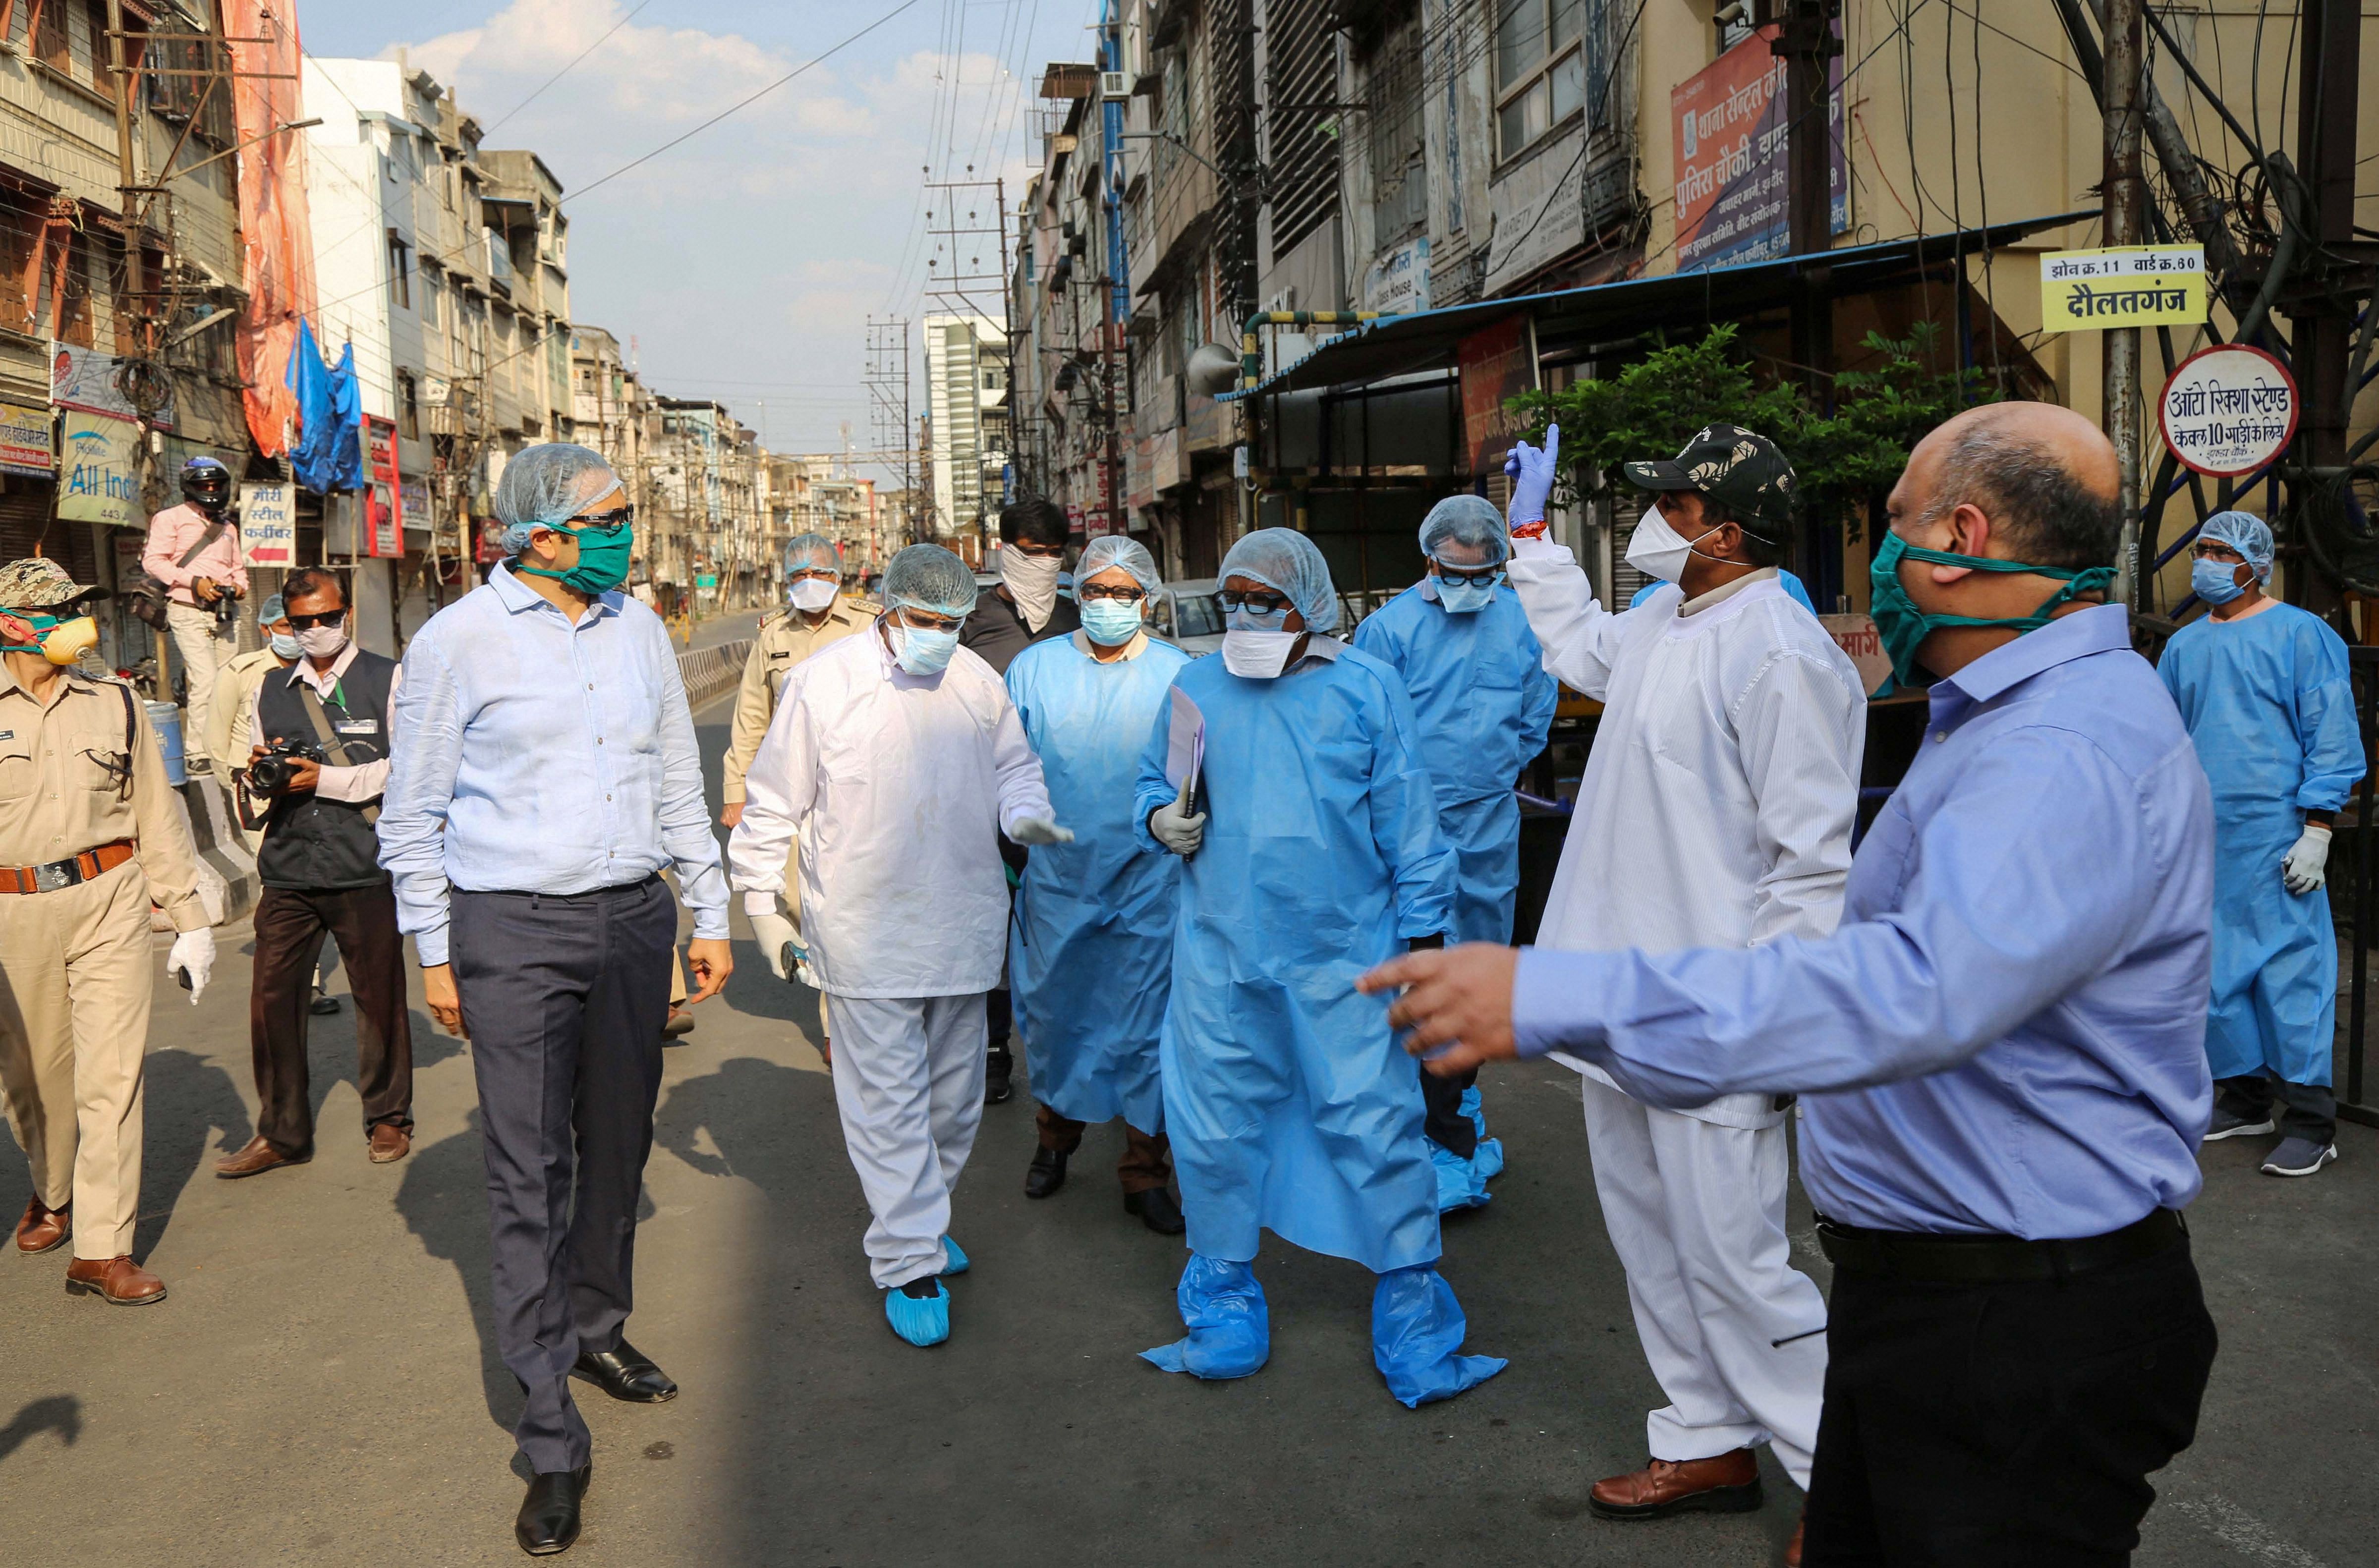 Indore divisional commissioner Akash Tripathi along with senior officials inspects Taat Patti Bakhal area where health workers were attacked by some locals who went there to screen residents in wake of COVID 19 pandemic. (PTI Photo)